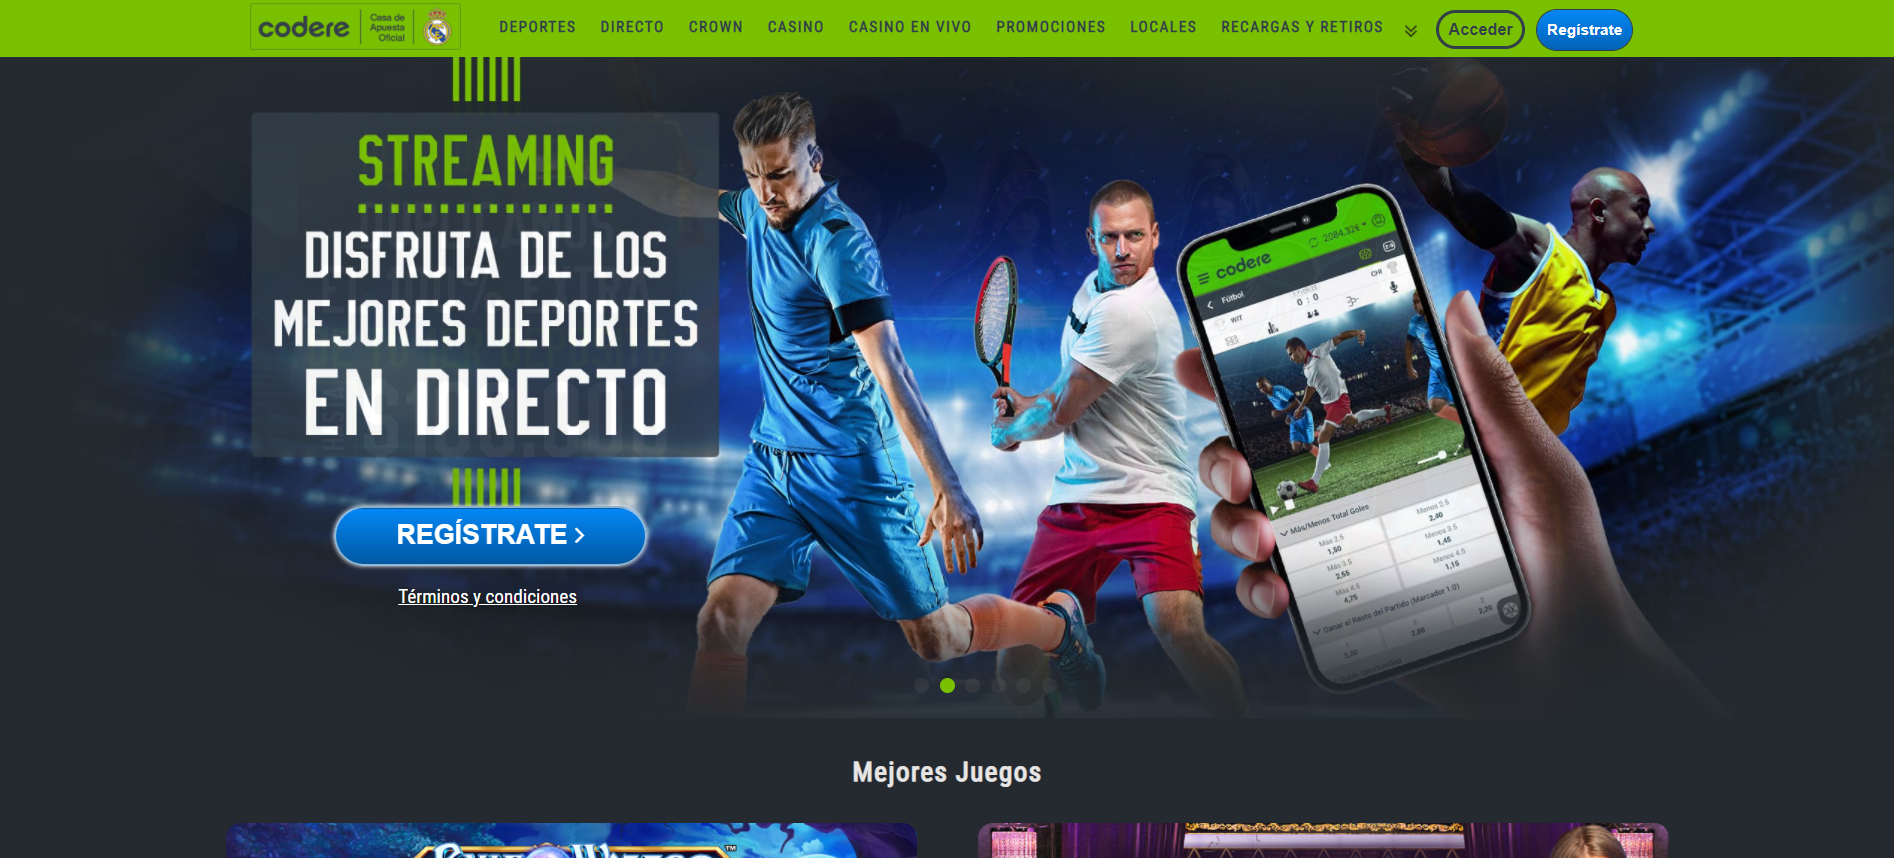 A top betting platform provided by Codere with several payment options and bets for maximum winnings.